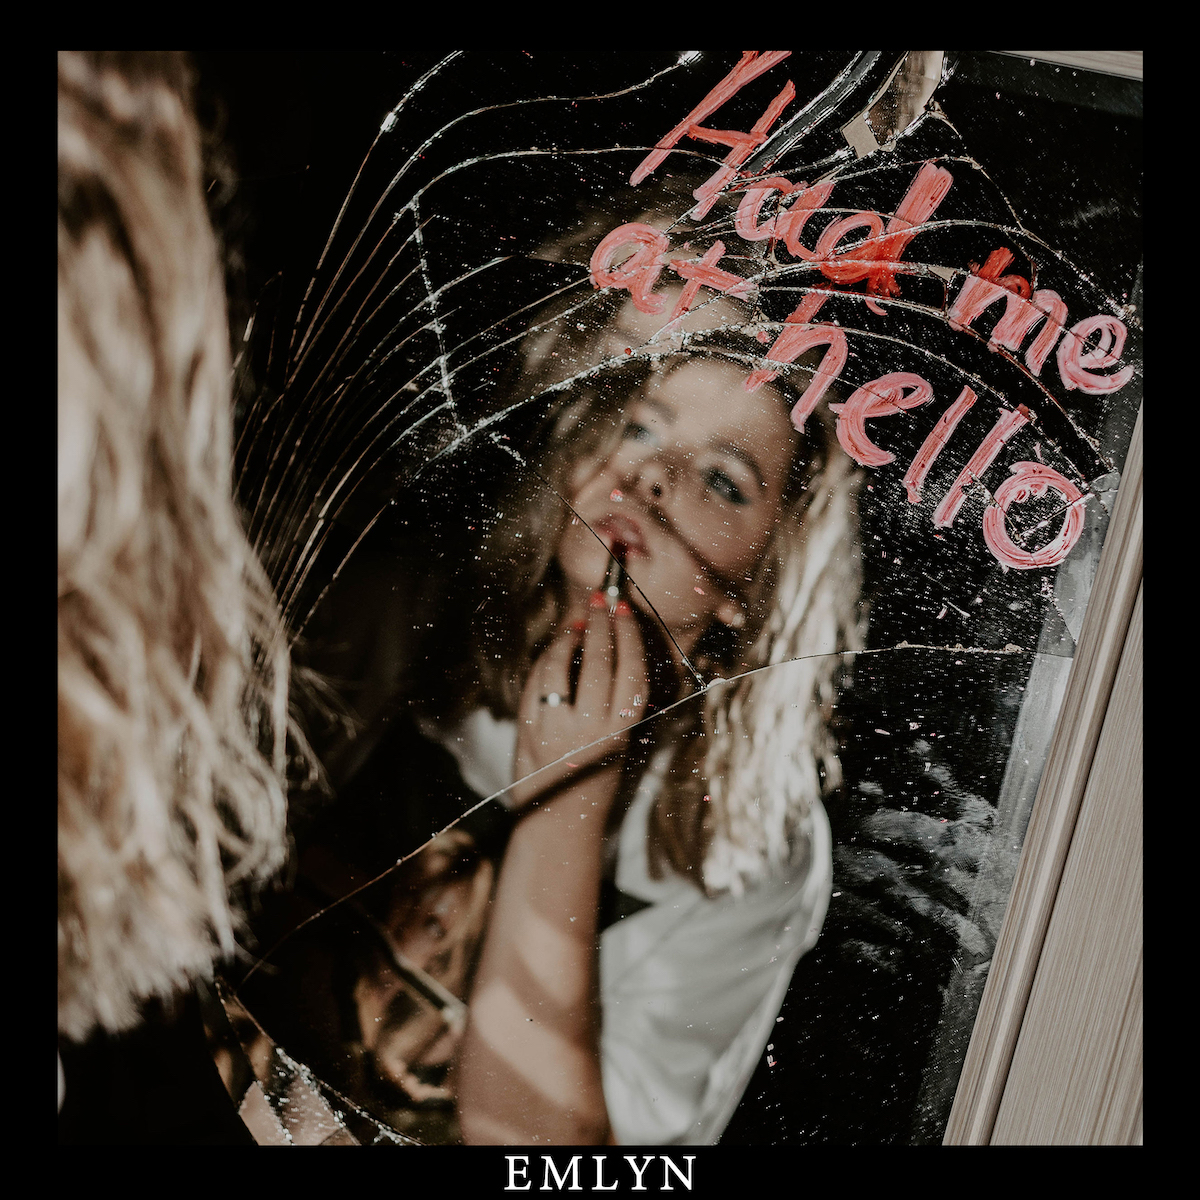 LISTEN TO EMLYN’S STORIES, STARTING WITH DEBUT SINGLE, “HAD ME AT HELLO”